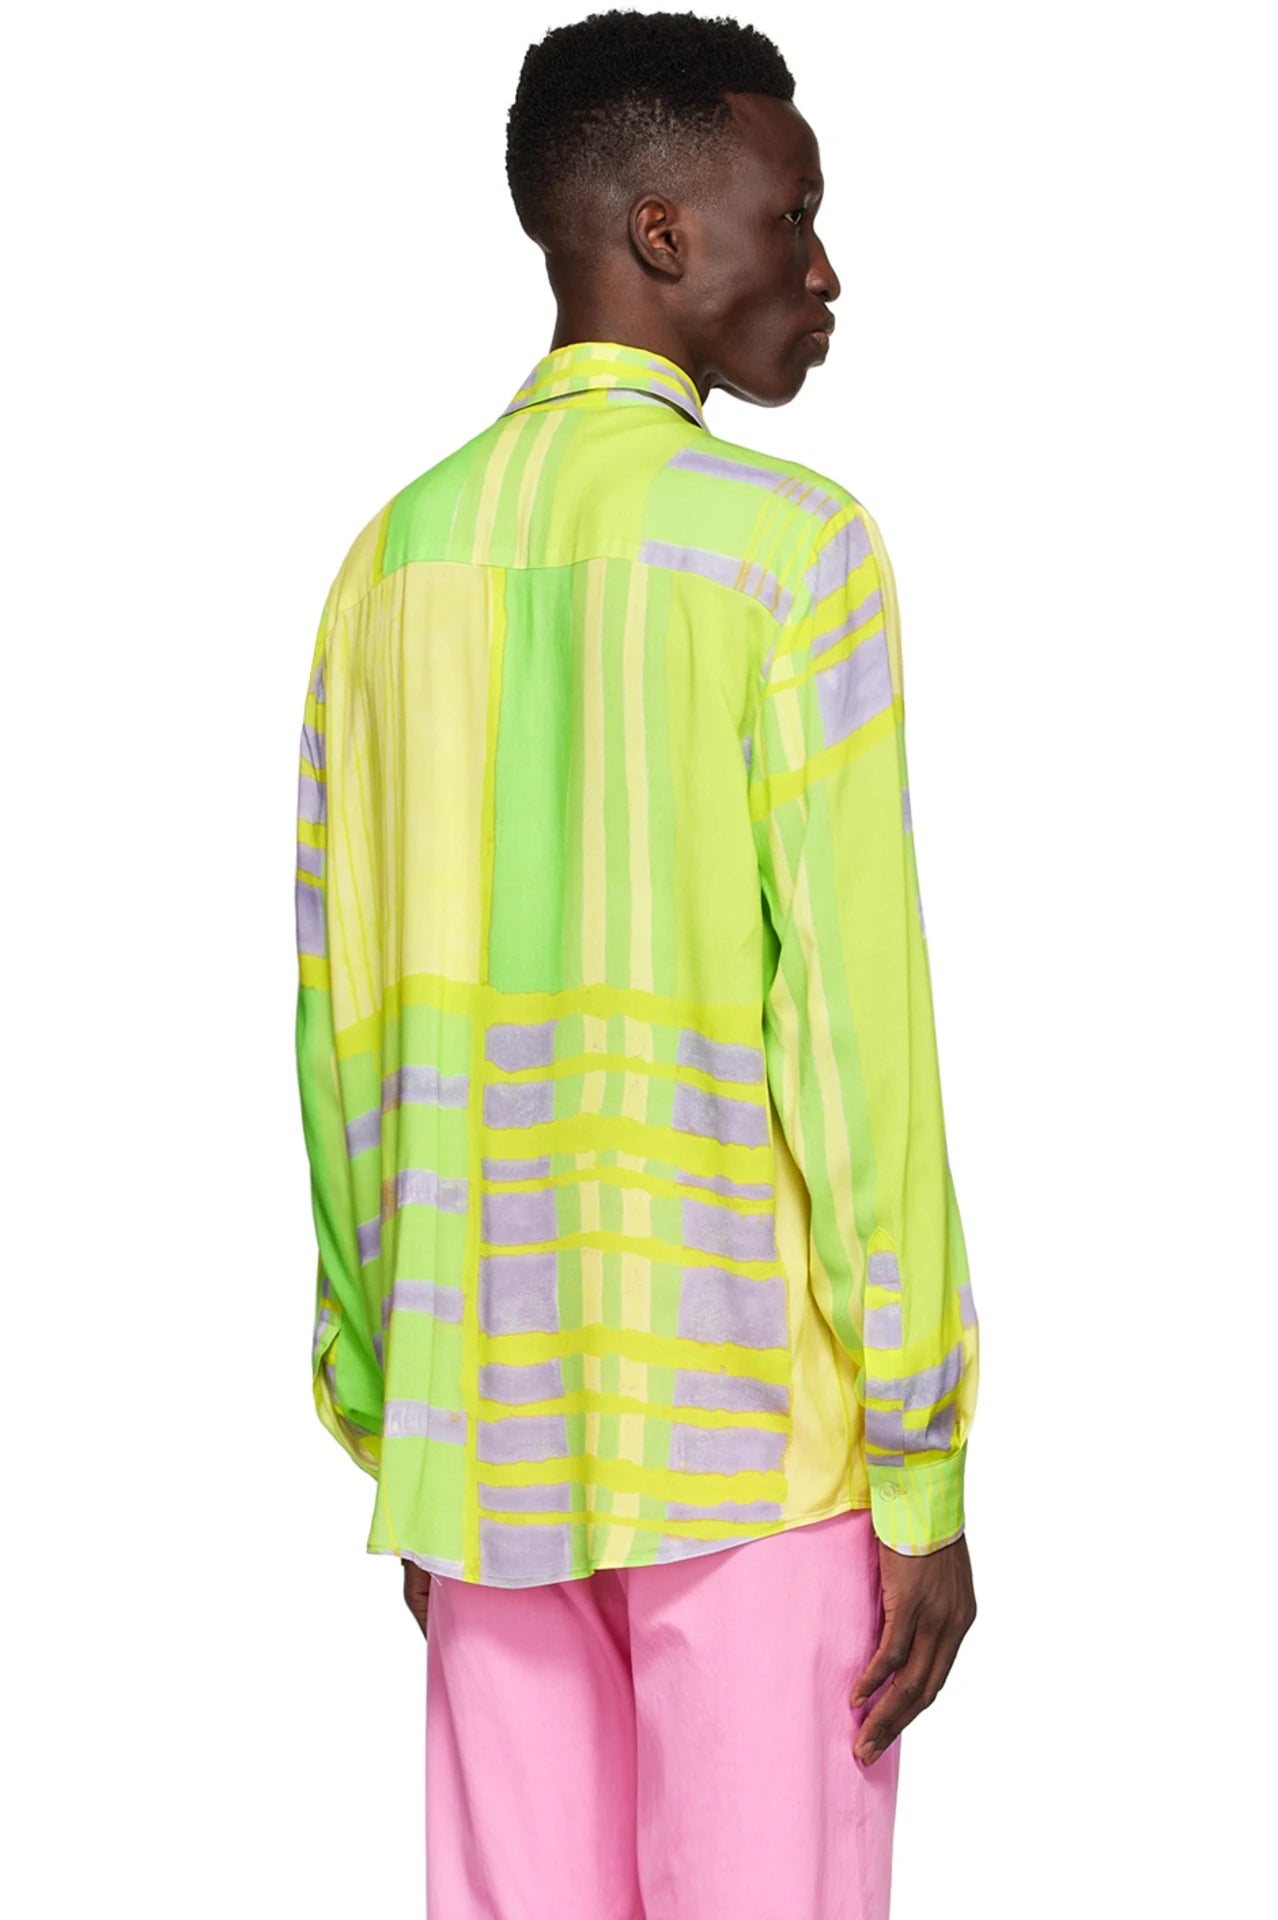 Collina Strada - Convention Button Up: Lime Plaid